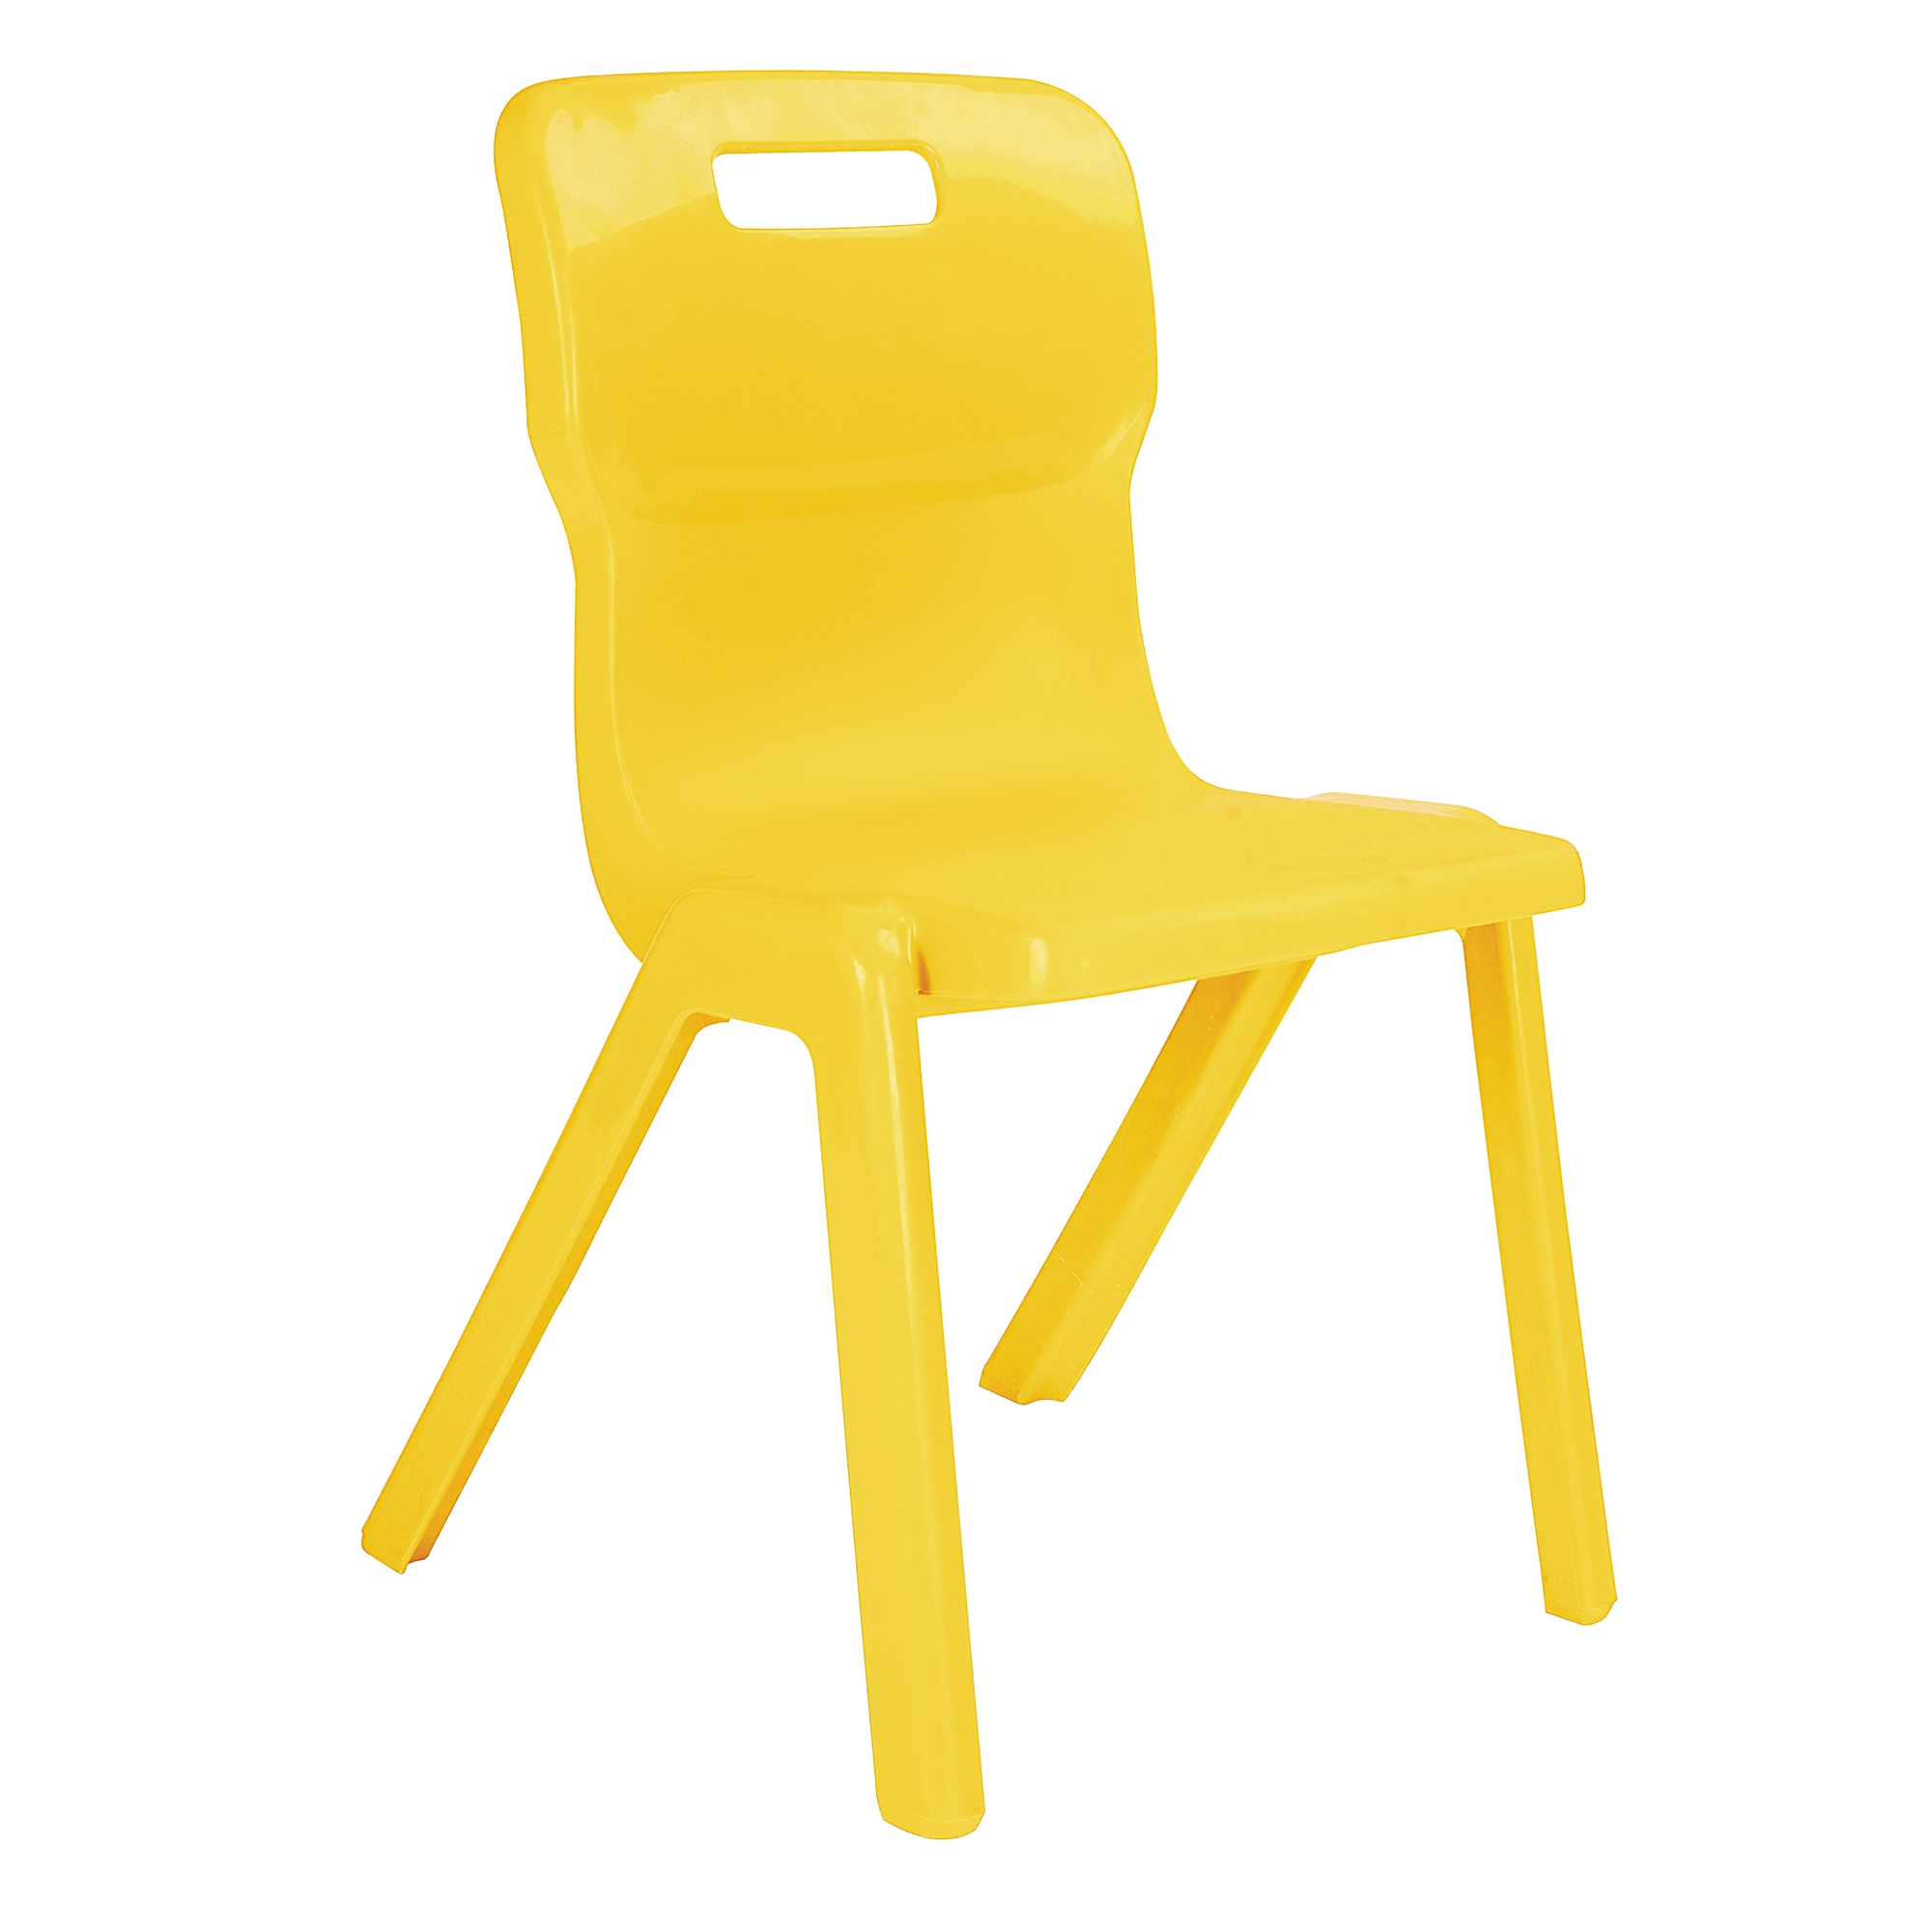 One Piece Titan Chair - Size 5 Ages 11-14 Yellow